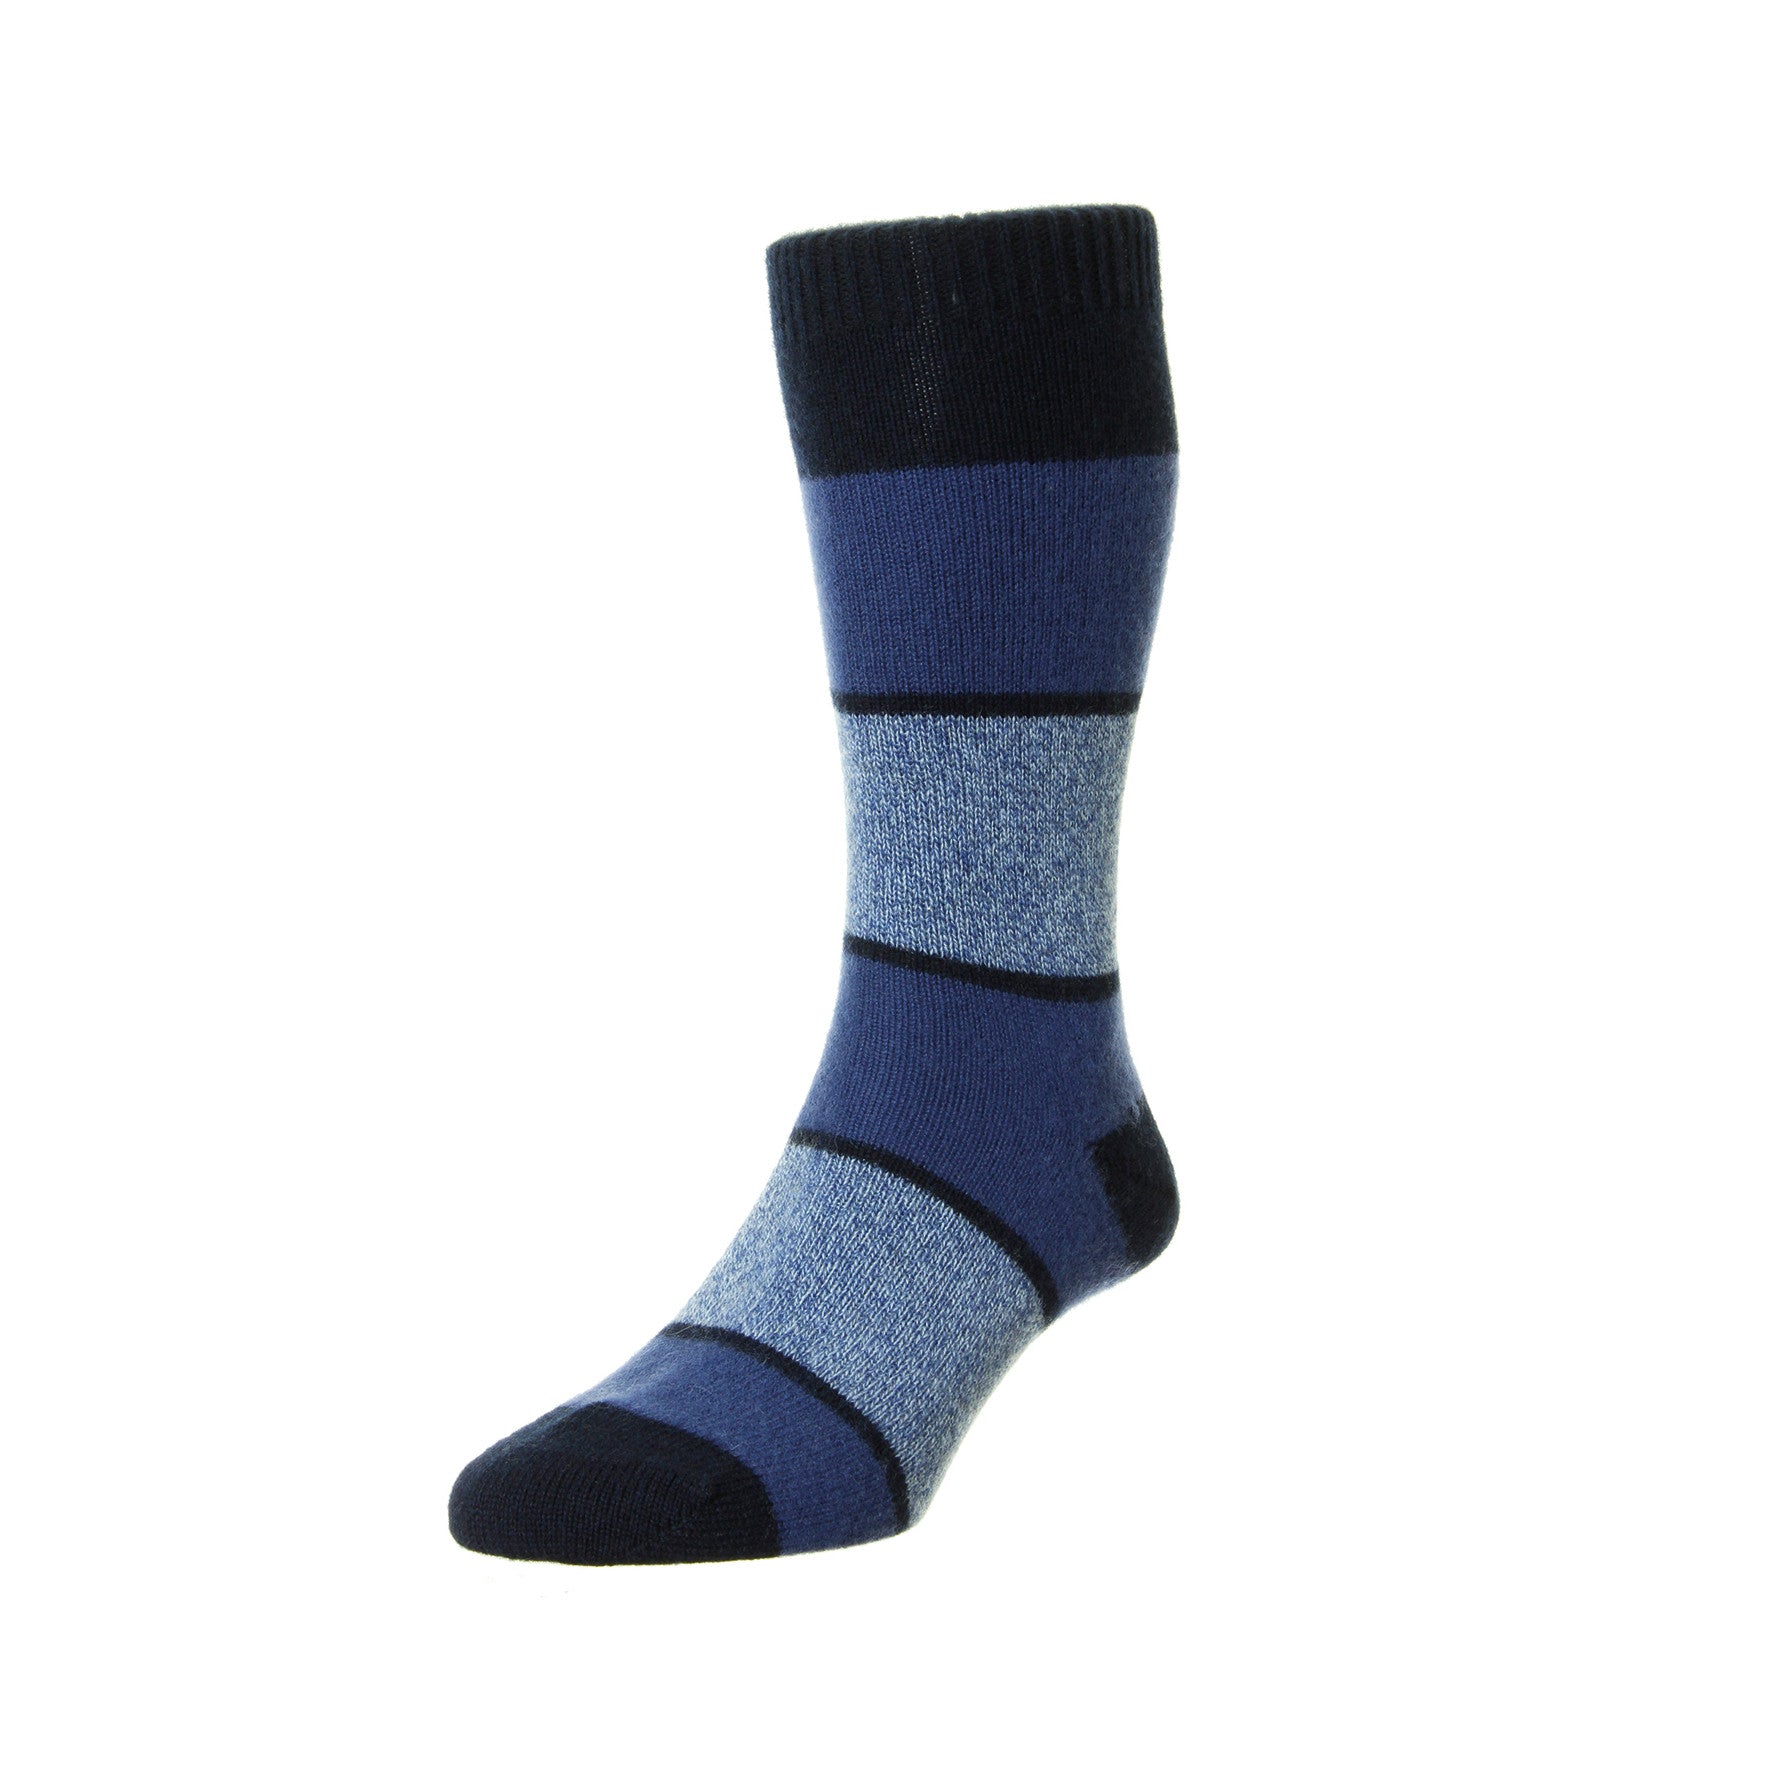 Pantherella - Mens Cashmere Socks - 5786 Striped - The Cashmere Choice